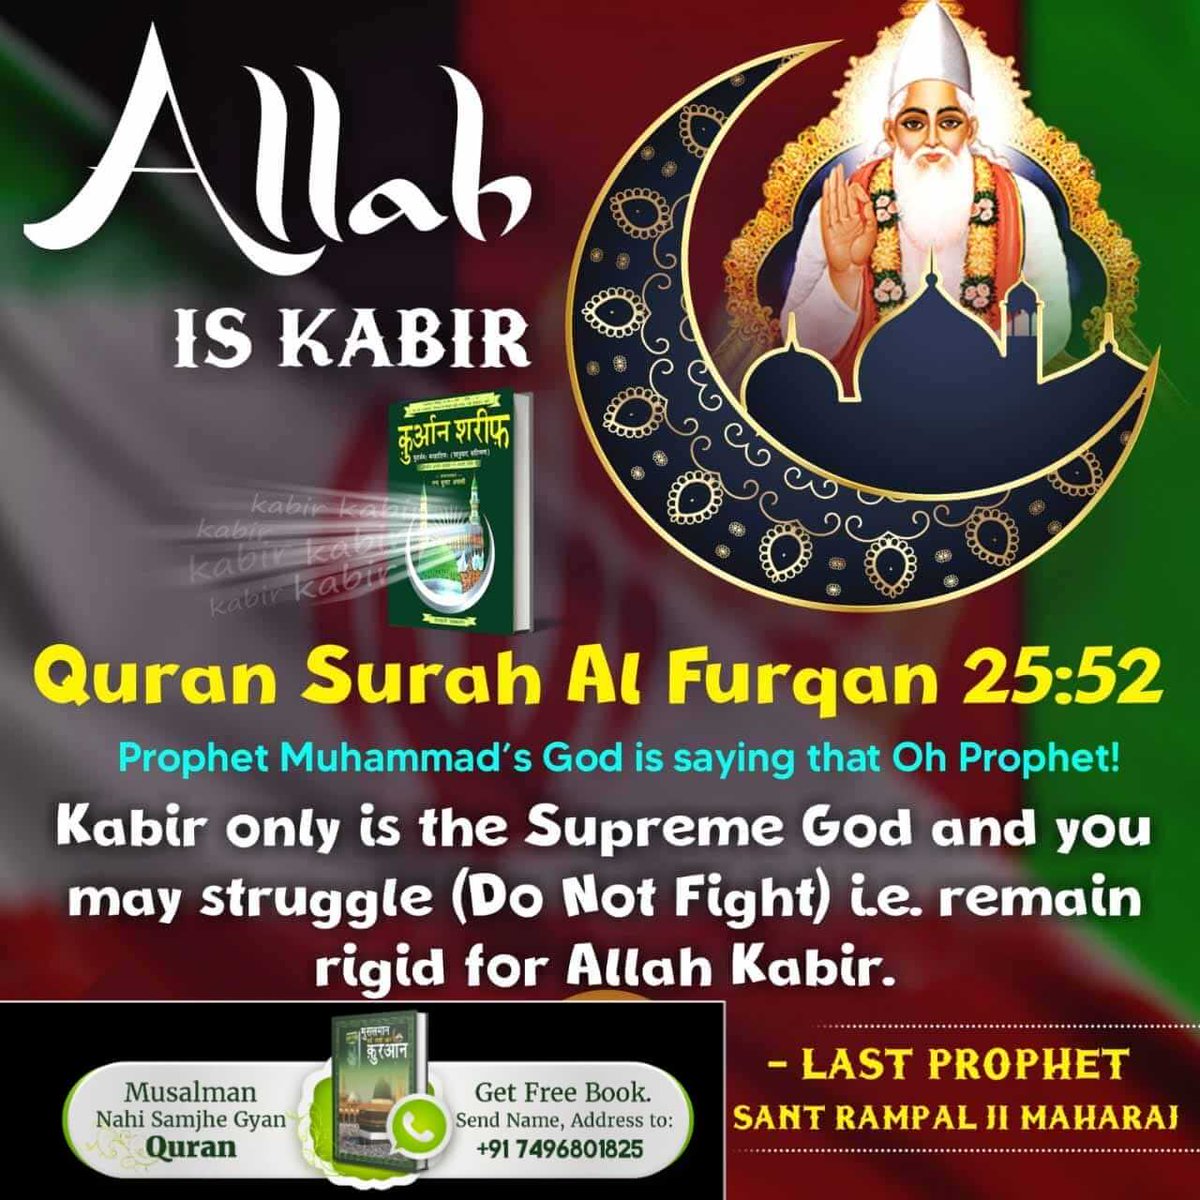 Today.s #SaturdayMotivation
The knowledge giver of Quran Shariff says,  He is Kabir Allah, who moved two rivers, water of one is sweet, to quench thirst, and of other is salty-bitter, and made strong blockade, stoppage inside both.
Allah Kabir
#HiddenSecretsInQuran